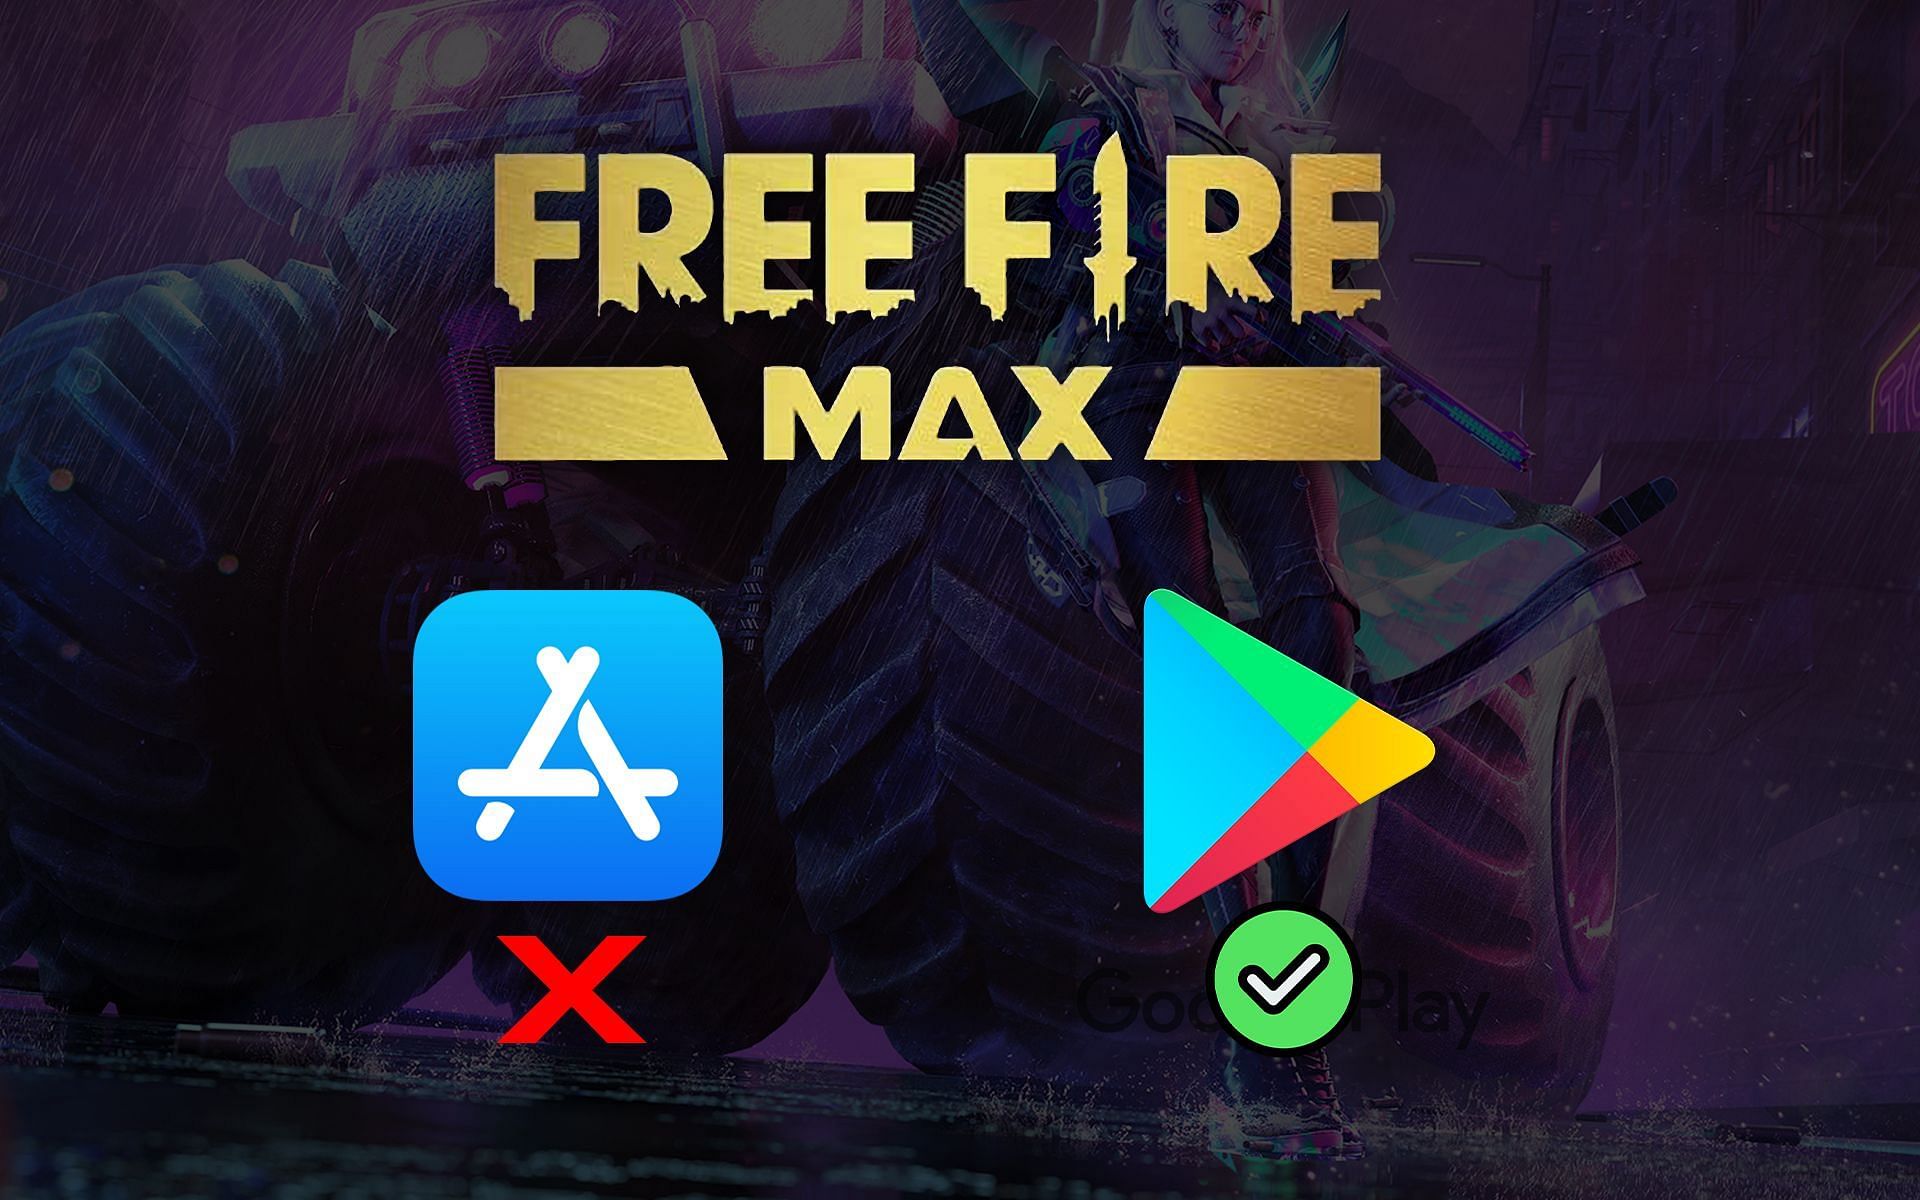 Free Fire MAX is still available on the Google Play Store, but not Apple App Store (Image via Sportskeeda)